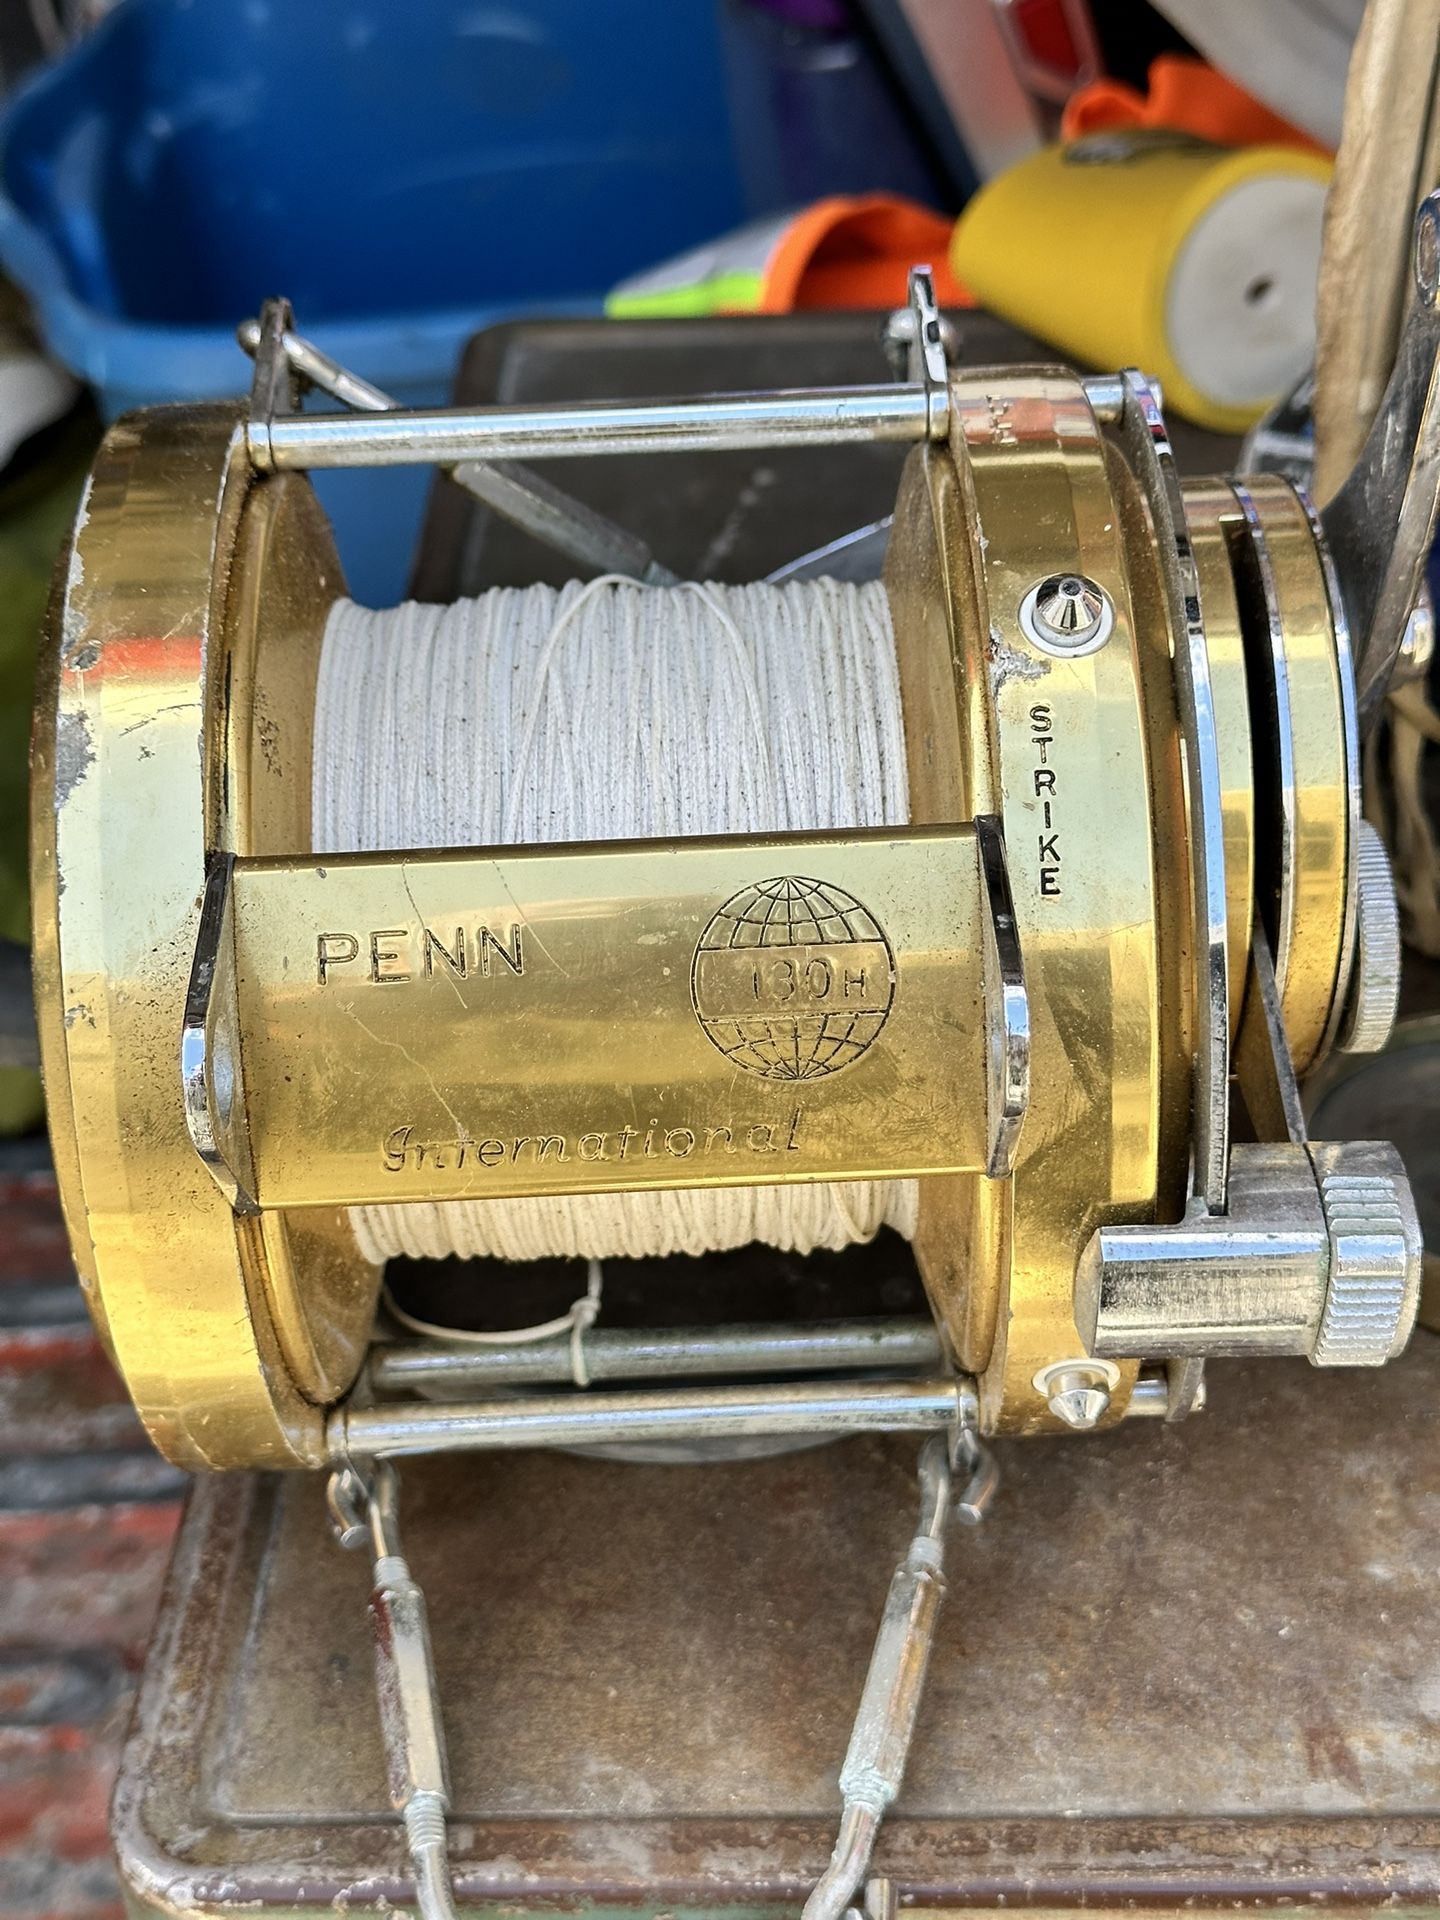 PENN International 130 h. Fishing Reels for Sale in Fountain Valley, CA -  OfferUp